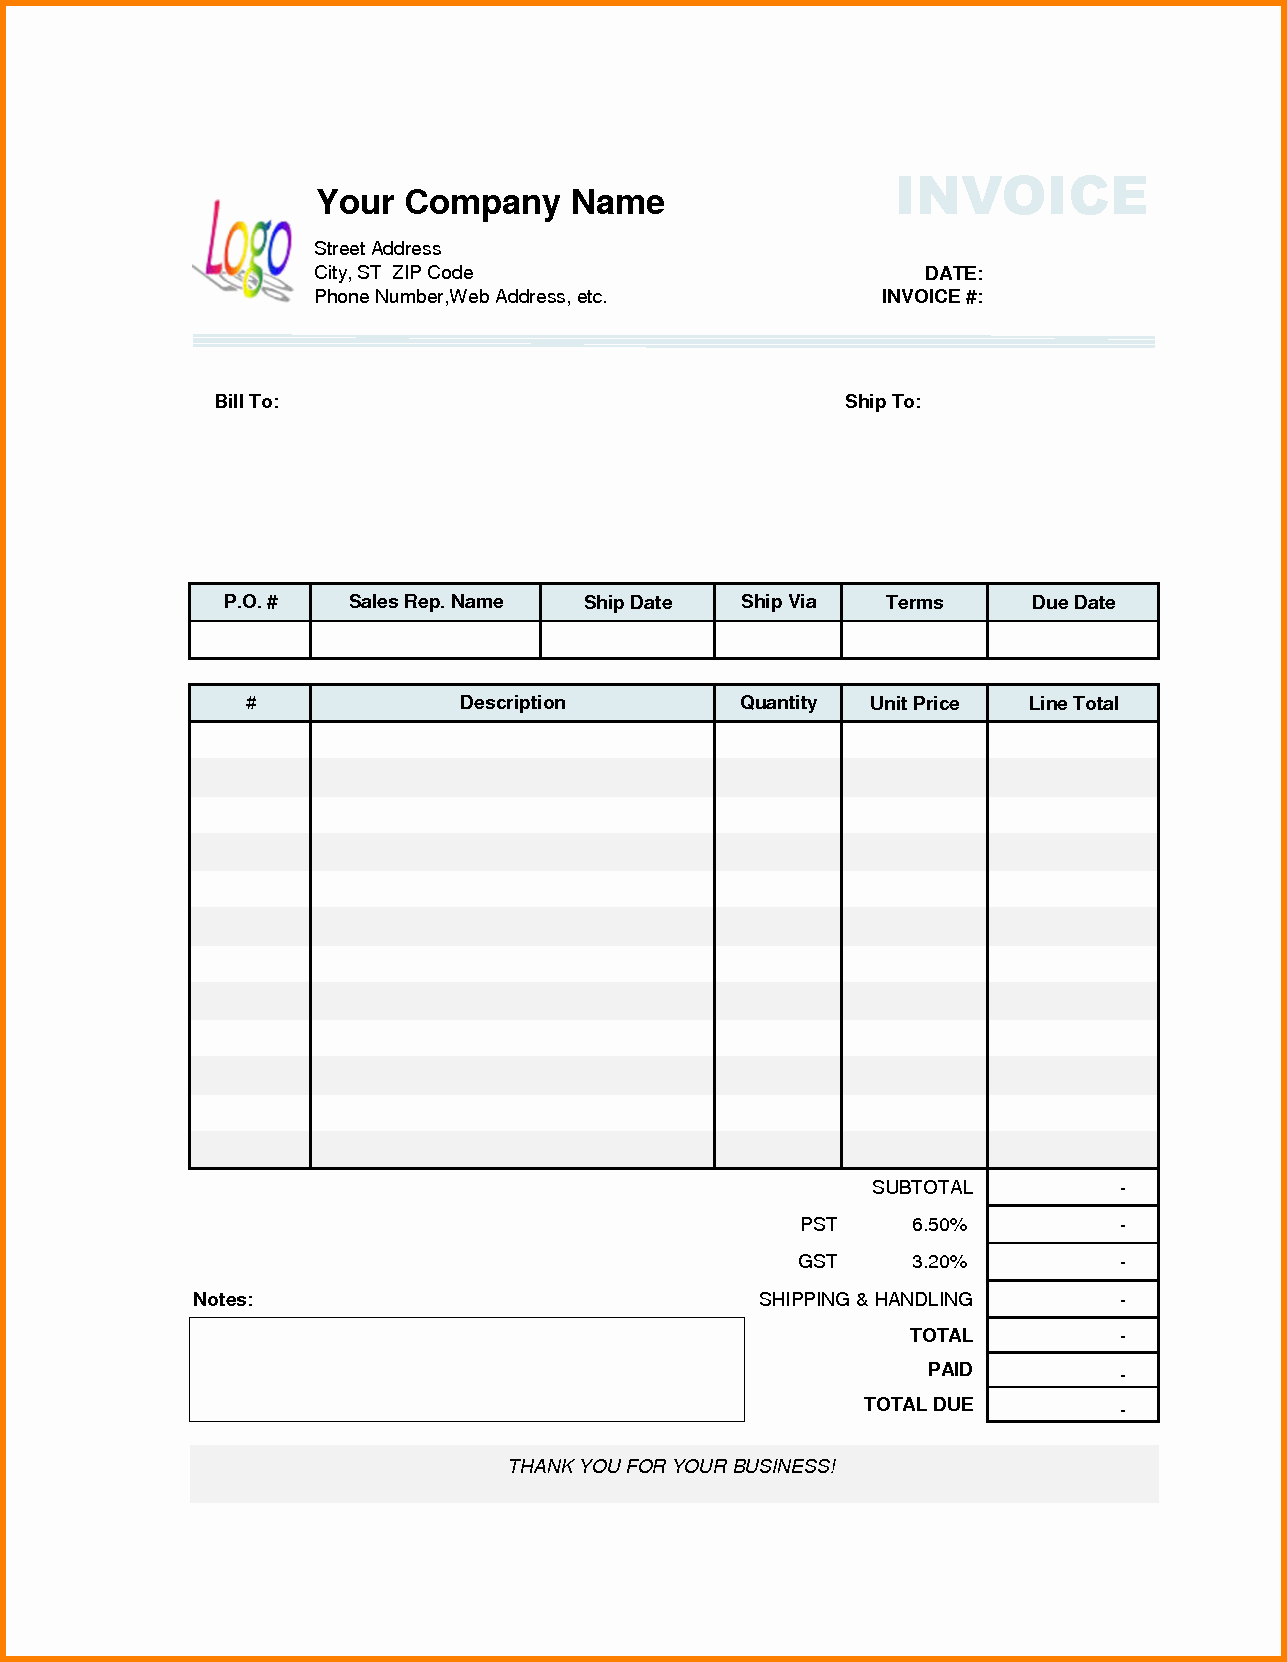 Paid In Full Receipt Template Fresh In Full Payments Receipts Templates